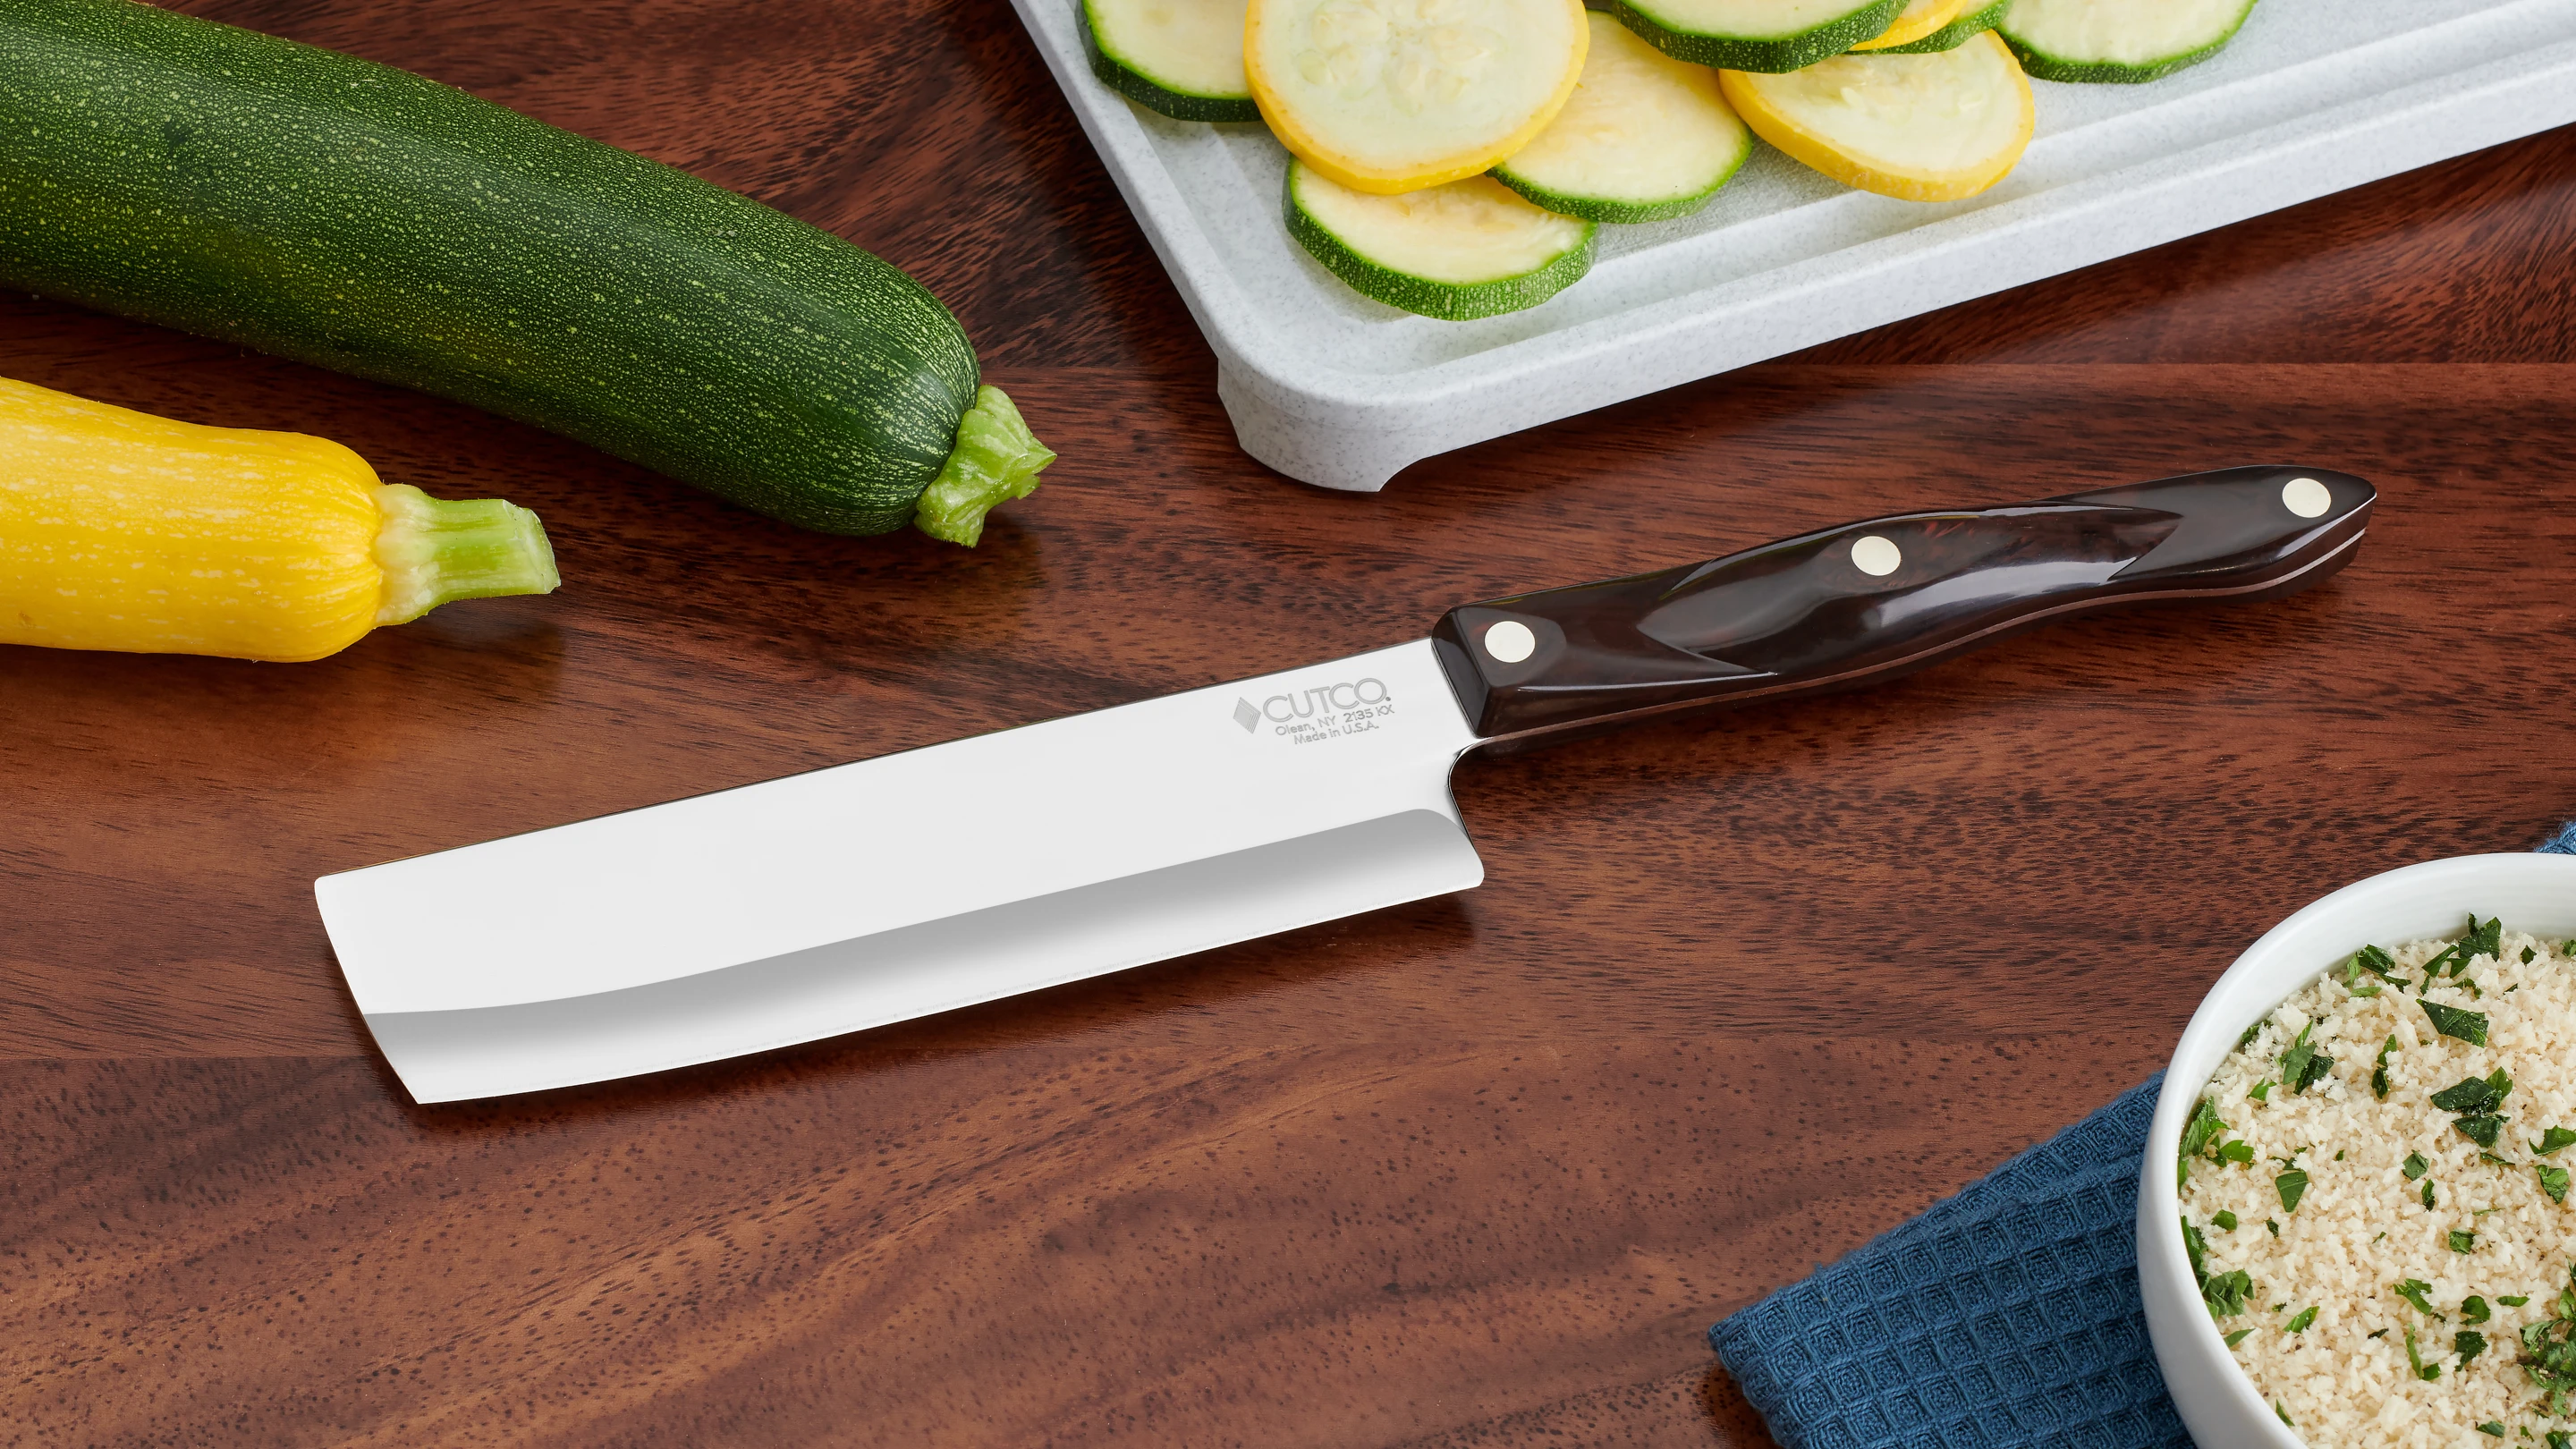  Cutco Nakiri Knife-This is THE knife for vegetable prep.  Designed for clean slicing, chopping and dicing of fruits and vegetables:  Home & Kitchen